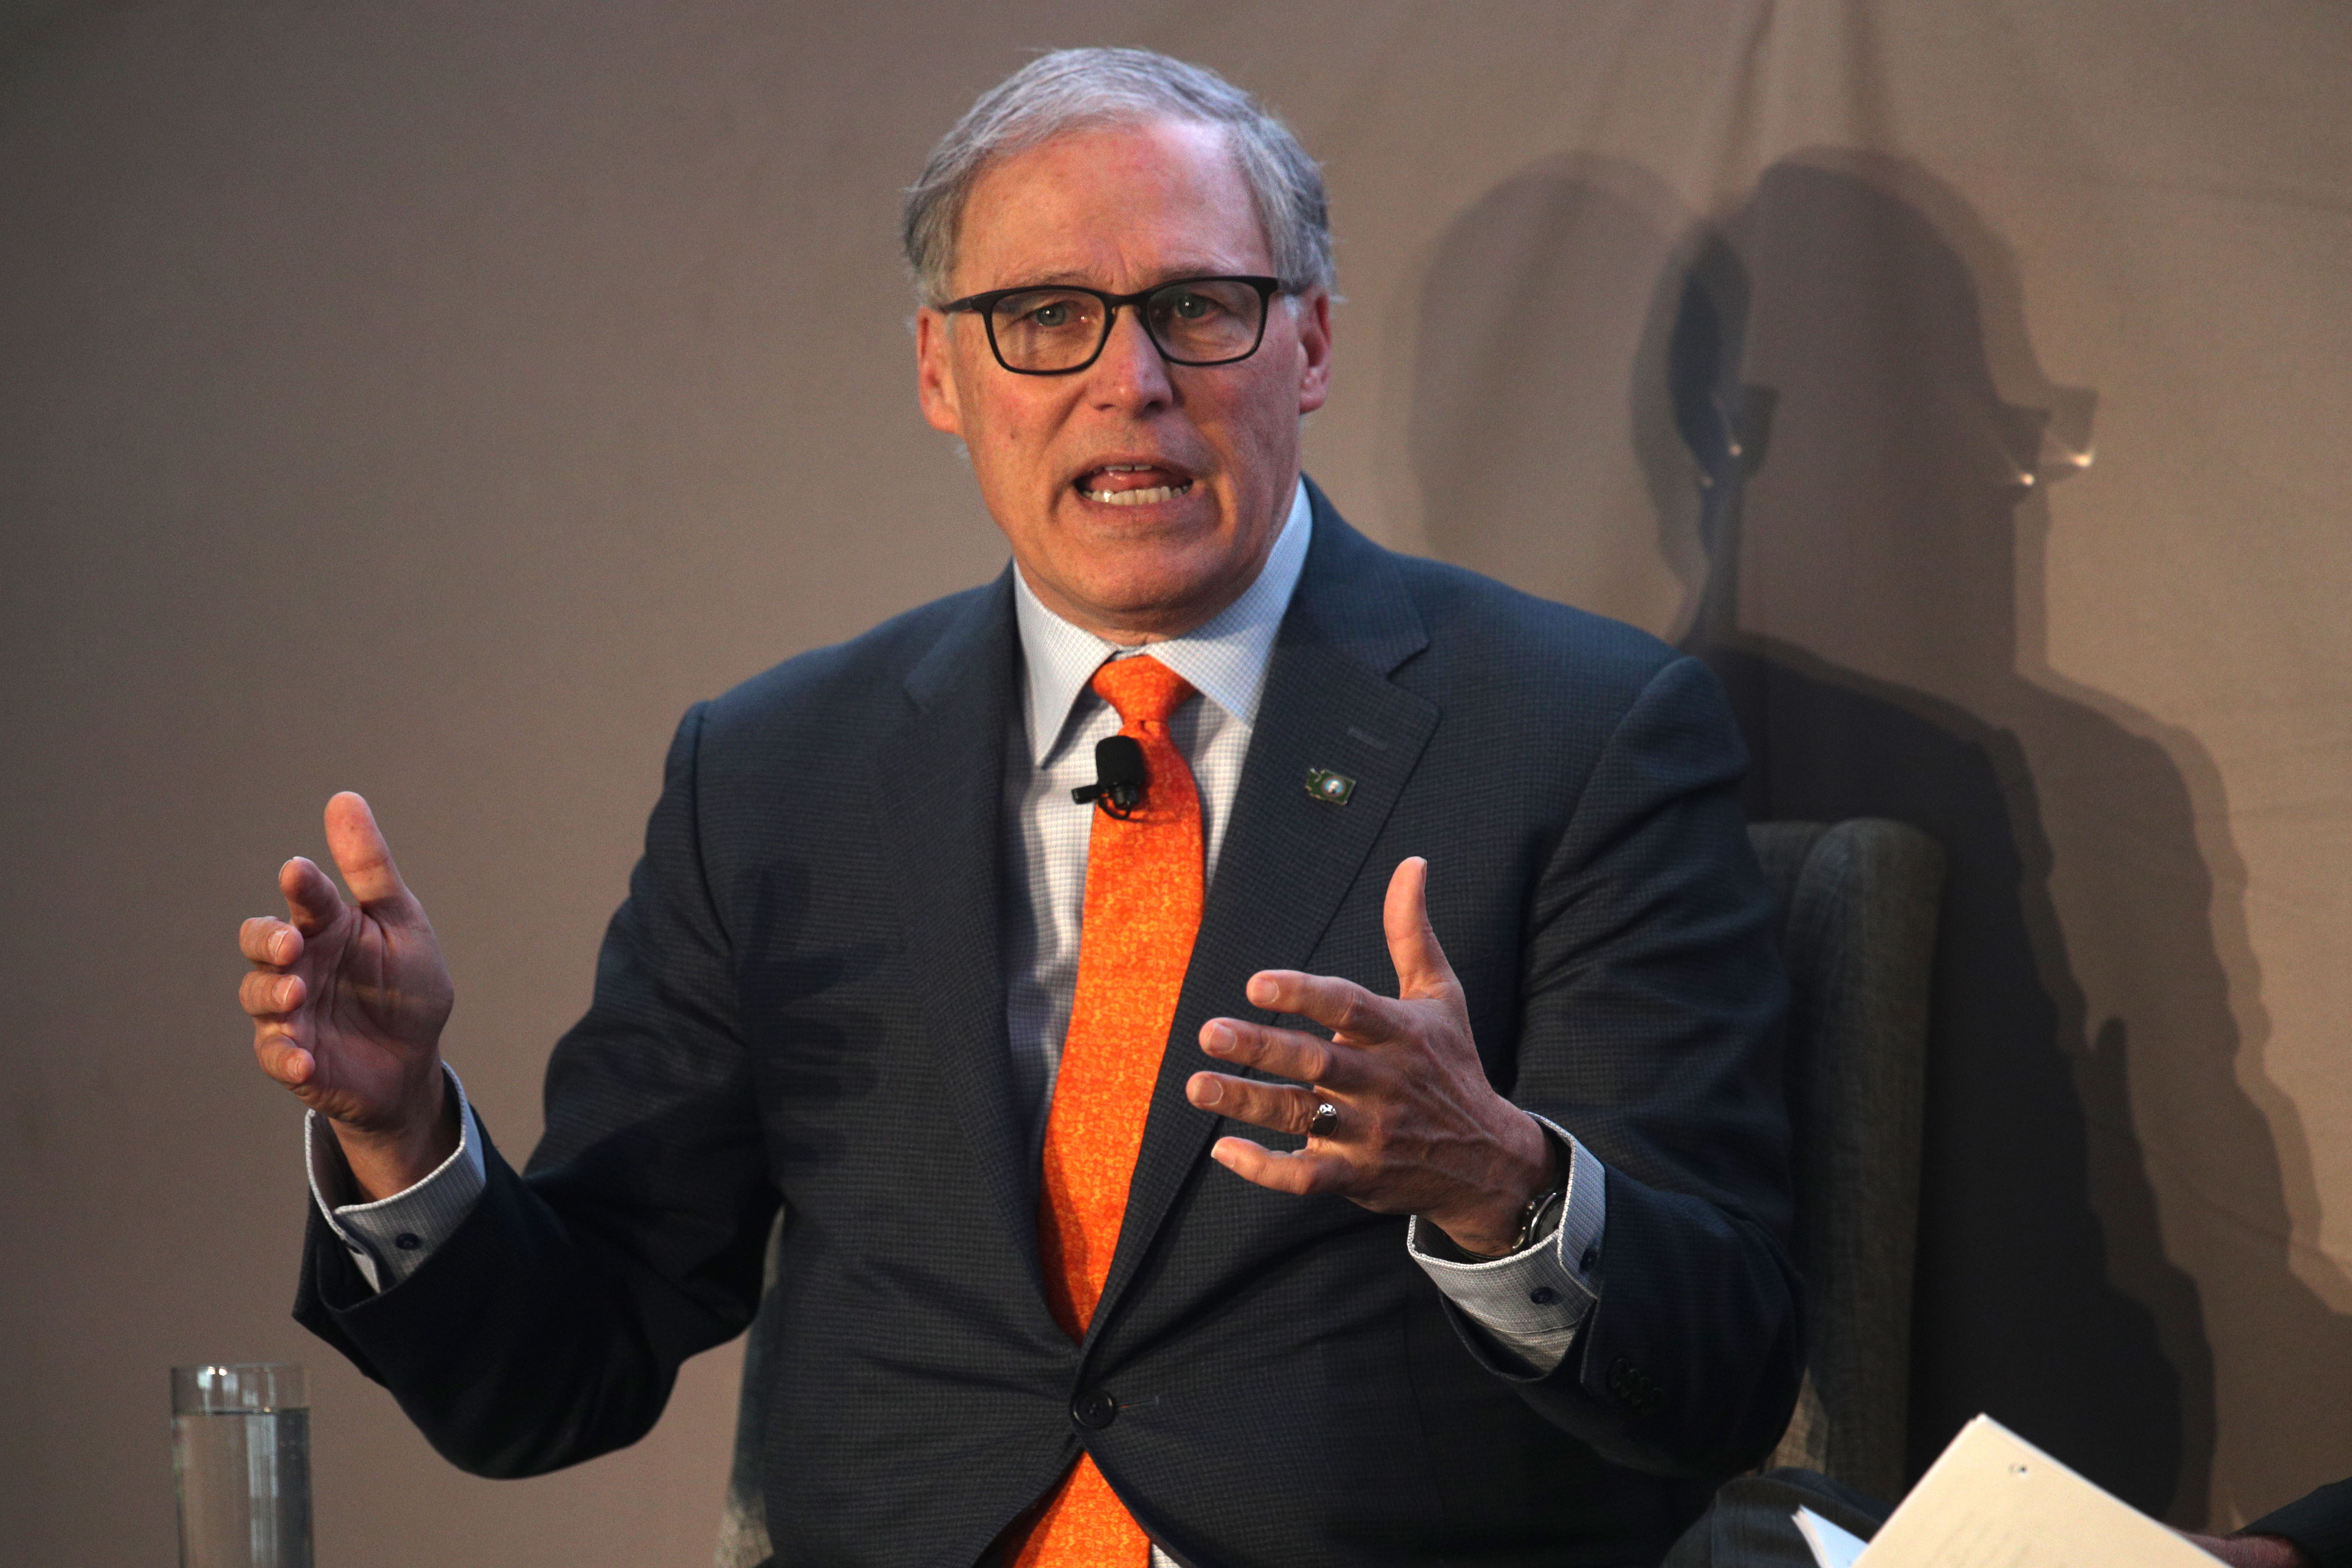 Washington State Governor Jay Inslee (D-WA) addresses American Council on Renewable Energy’s (ACORE) 2019 Renewable Energy Policy Forum March 20, 2019 in Washington, DC. (Alex Wong—Getty Images)